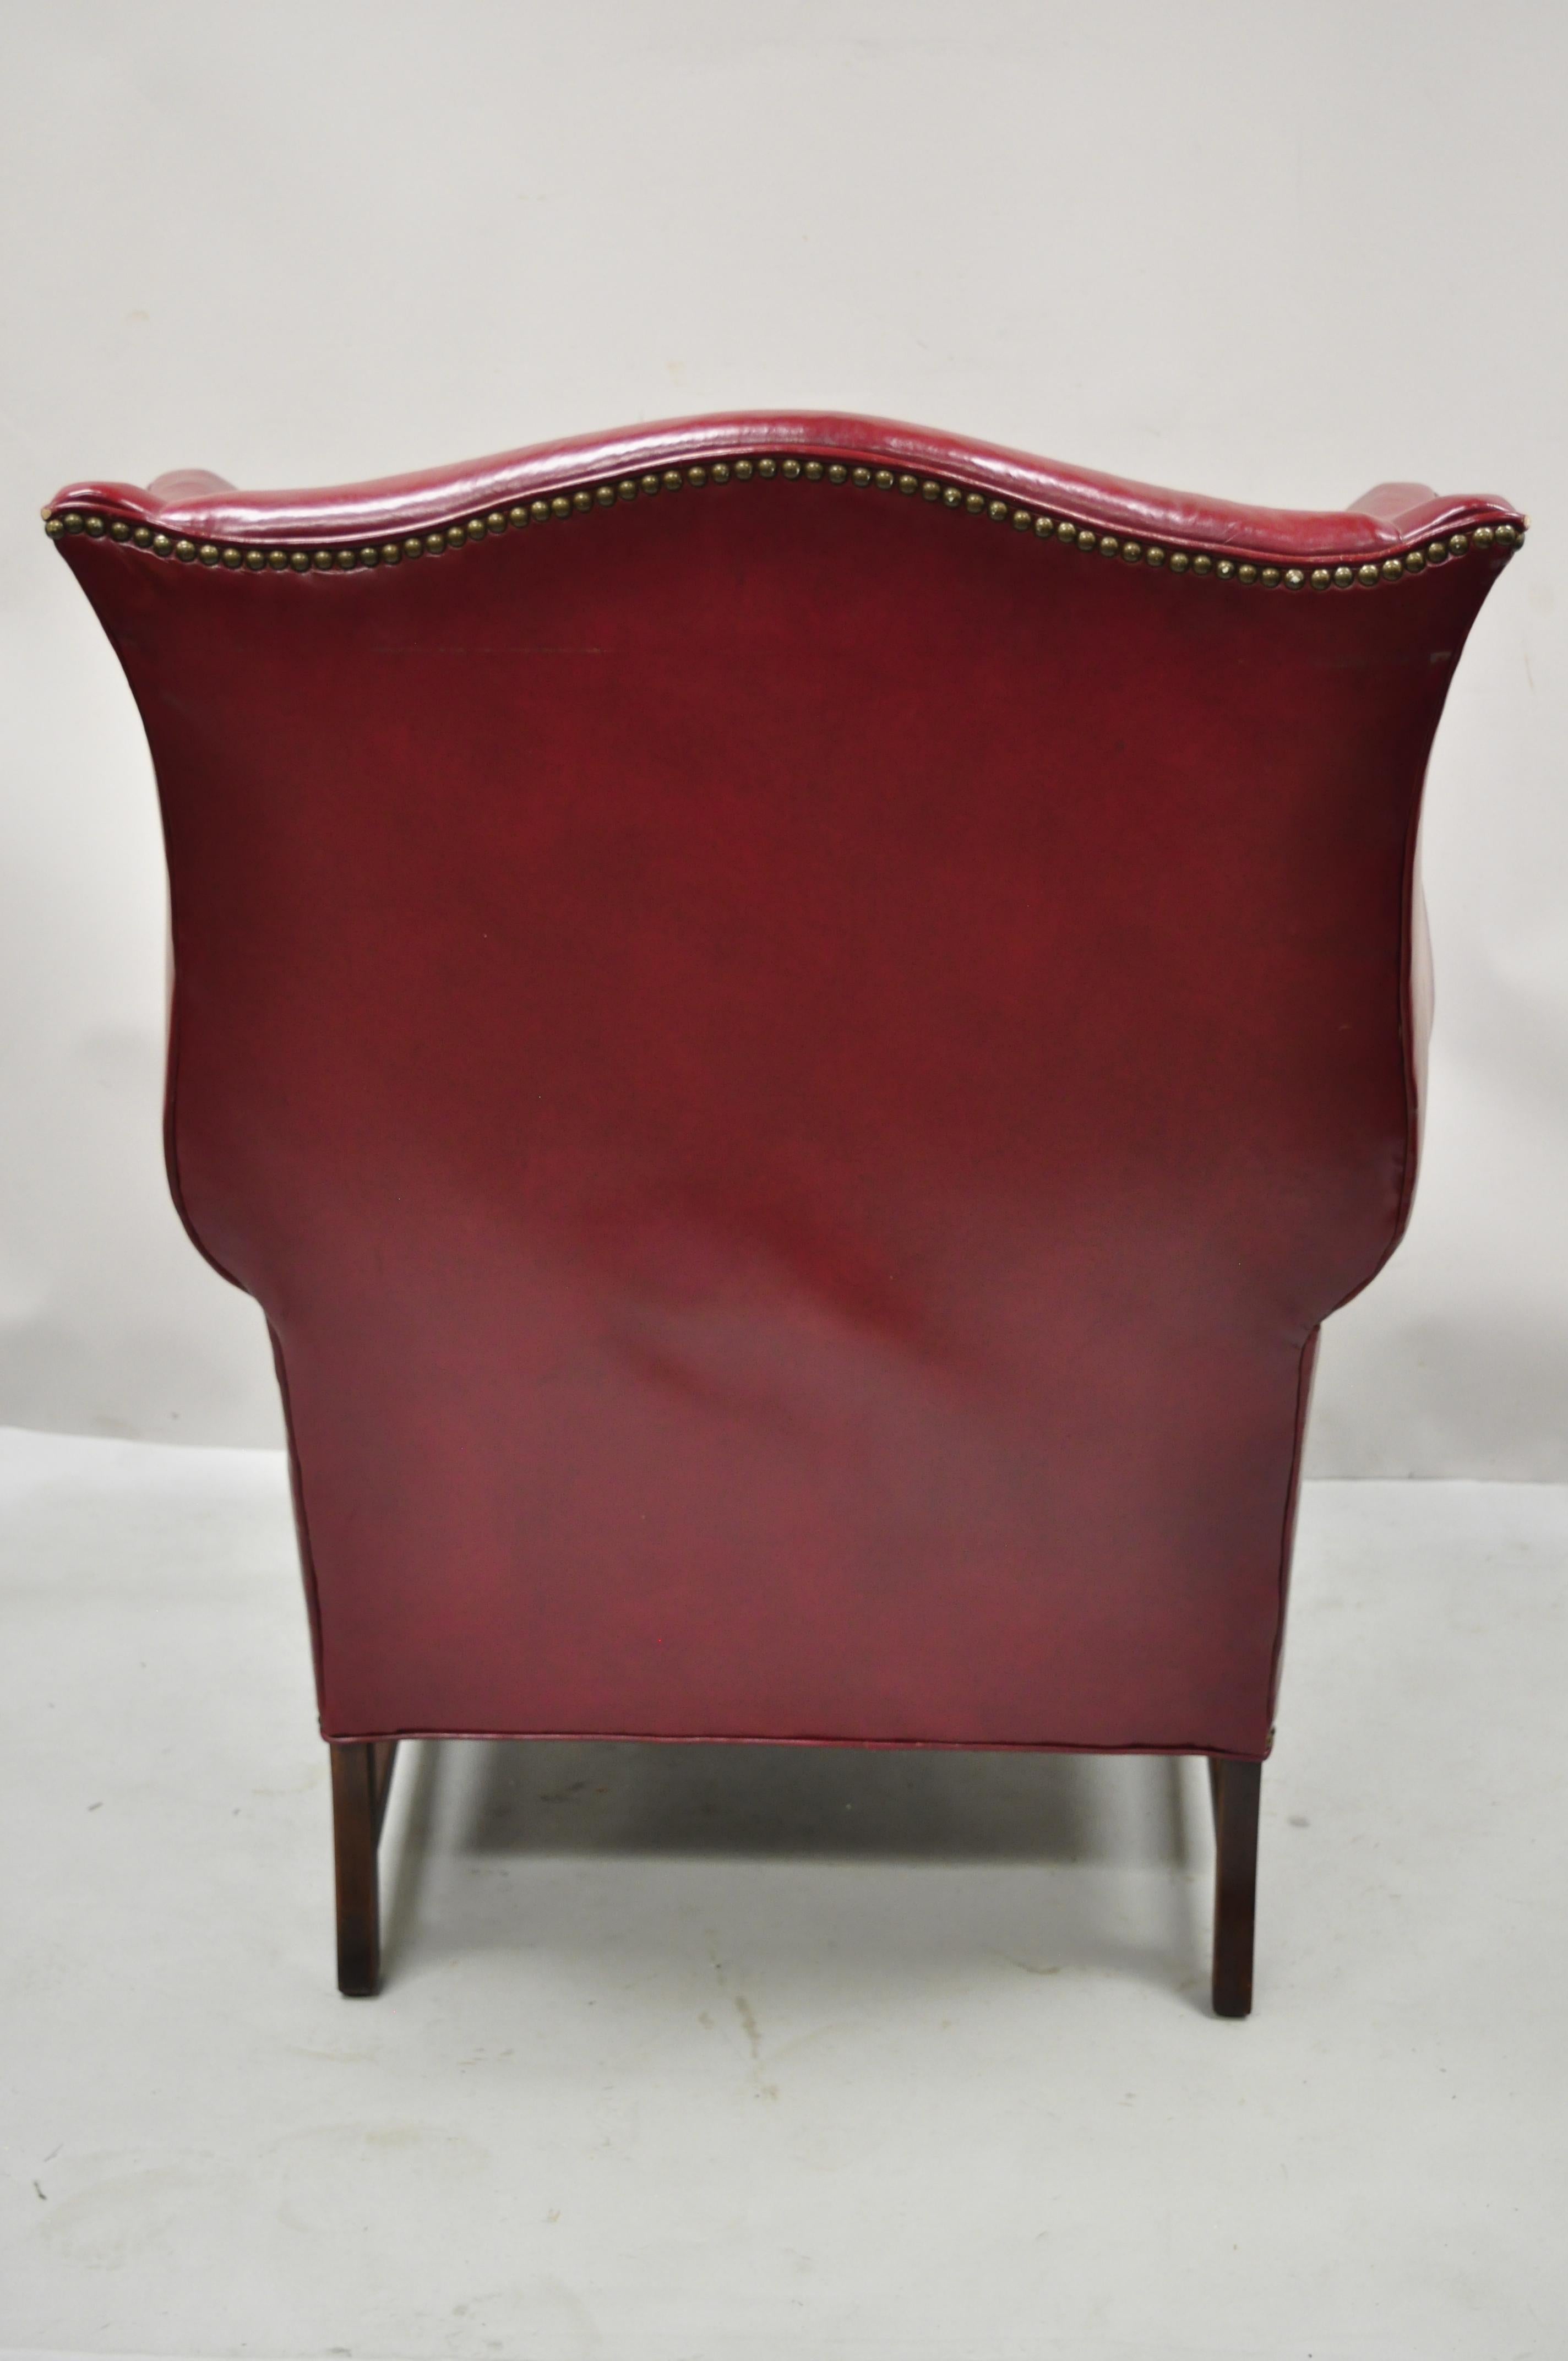 Ethan Allen English Georgian Burgundy Red Leather Wingback Lounge Chair Ottoman 2